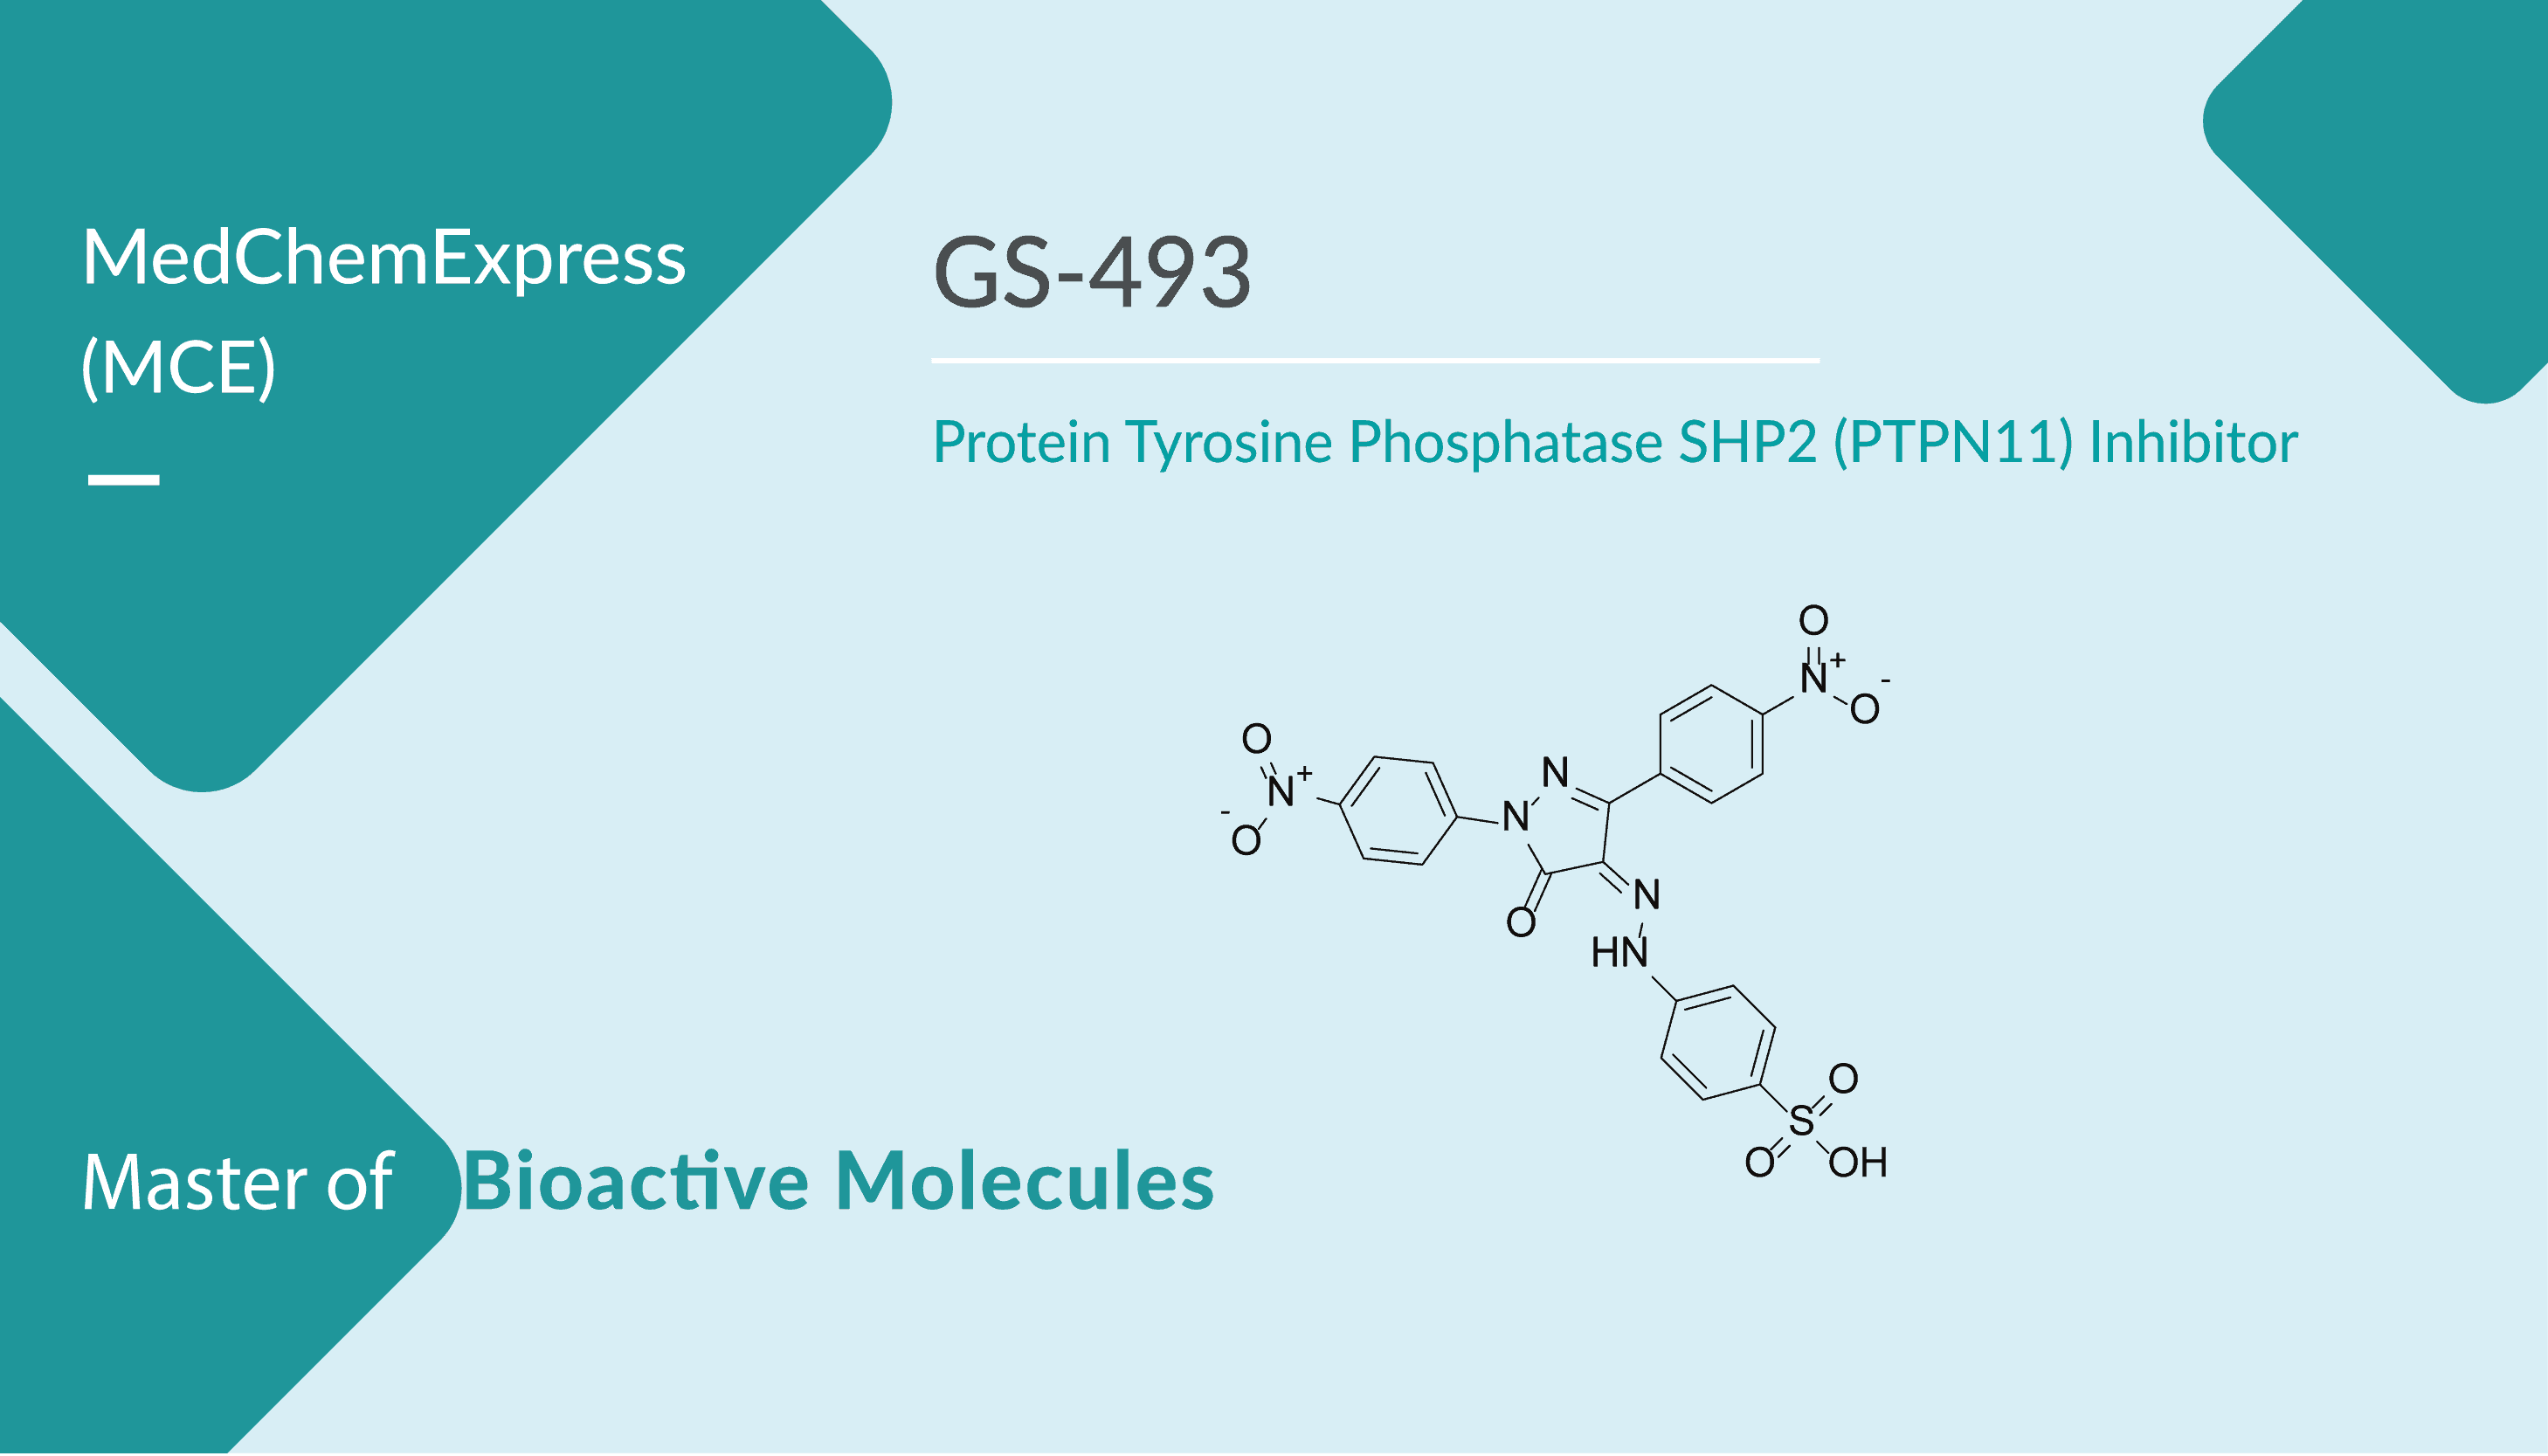 GS-493 is a Selective Protein Tyrosine Phosphatase SHP2 (PTPN11) Inhibitor